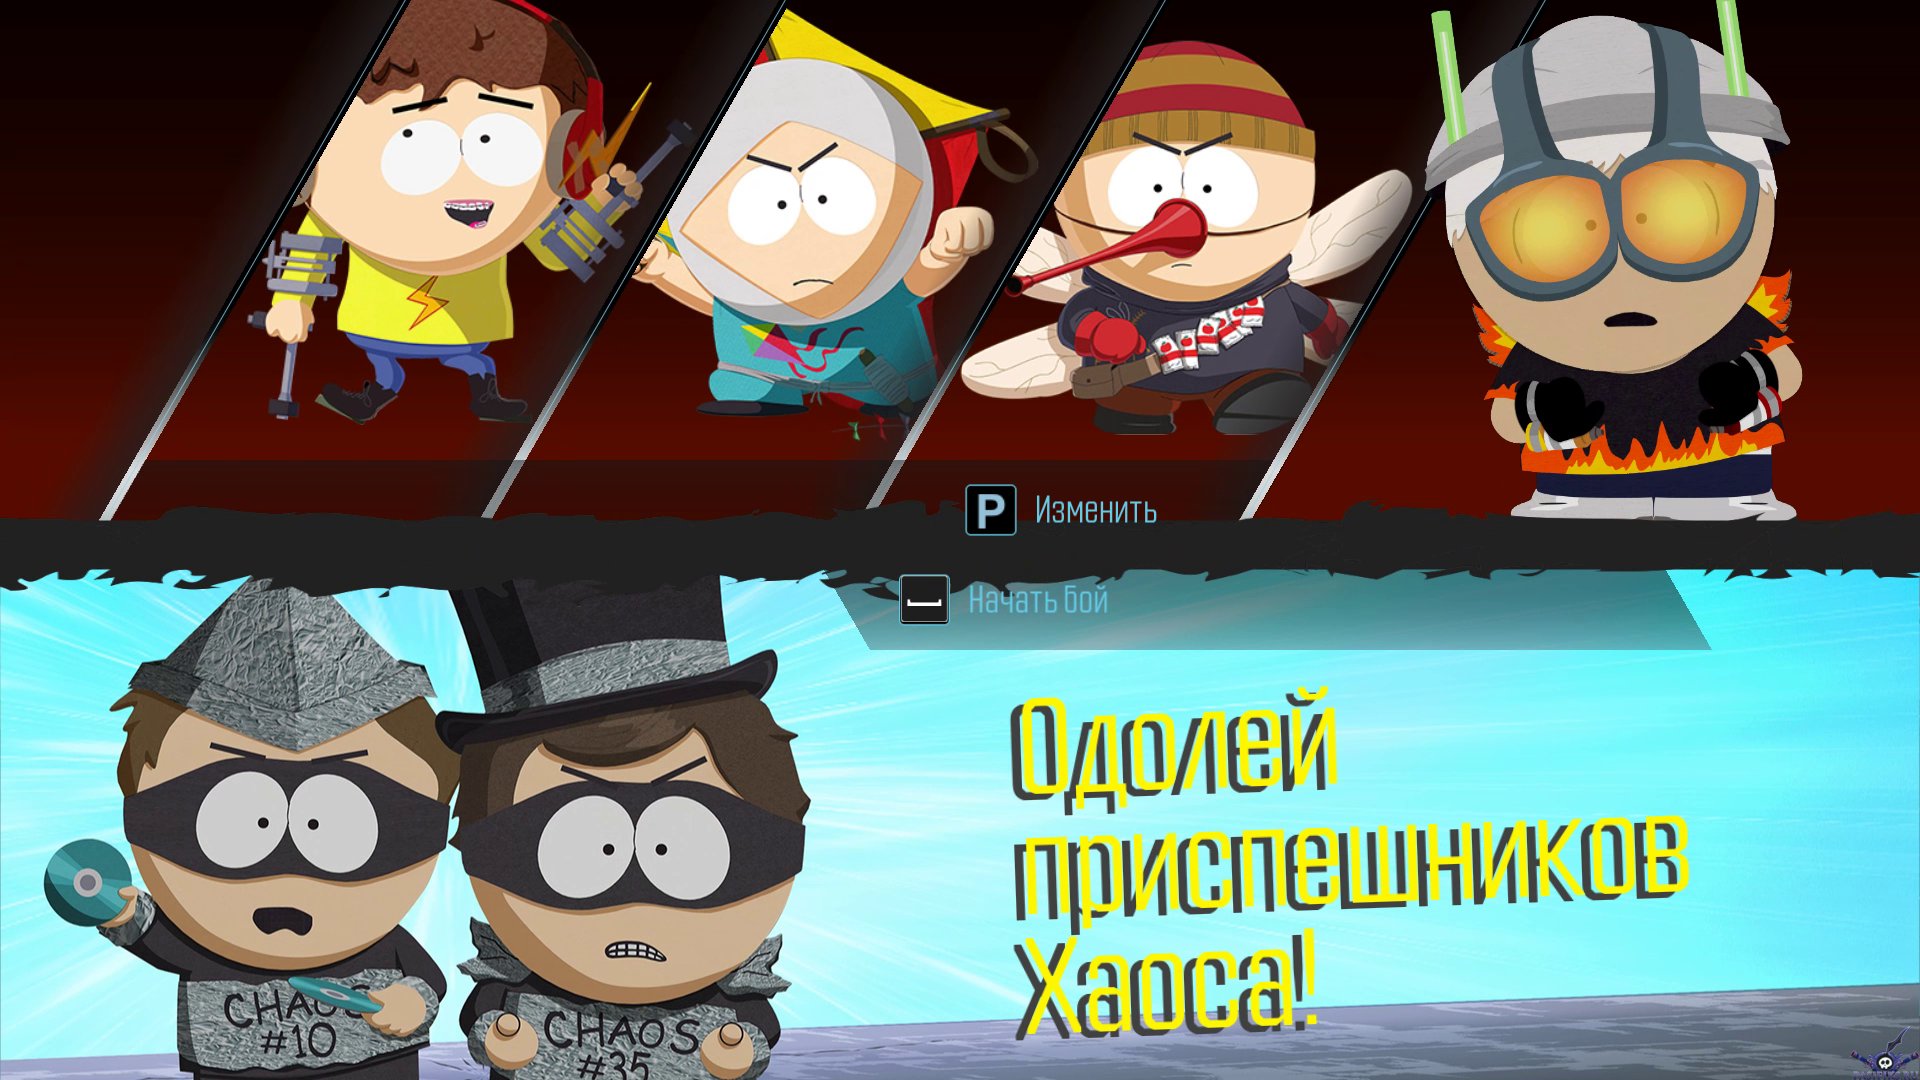 South park the fractured but whole купить ключ steam дешево фото 32